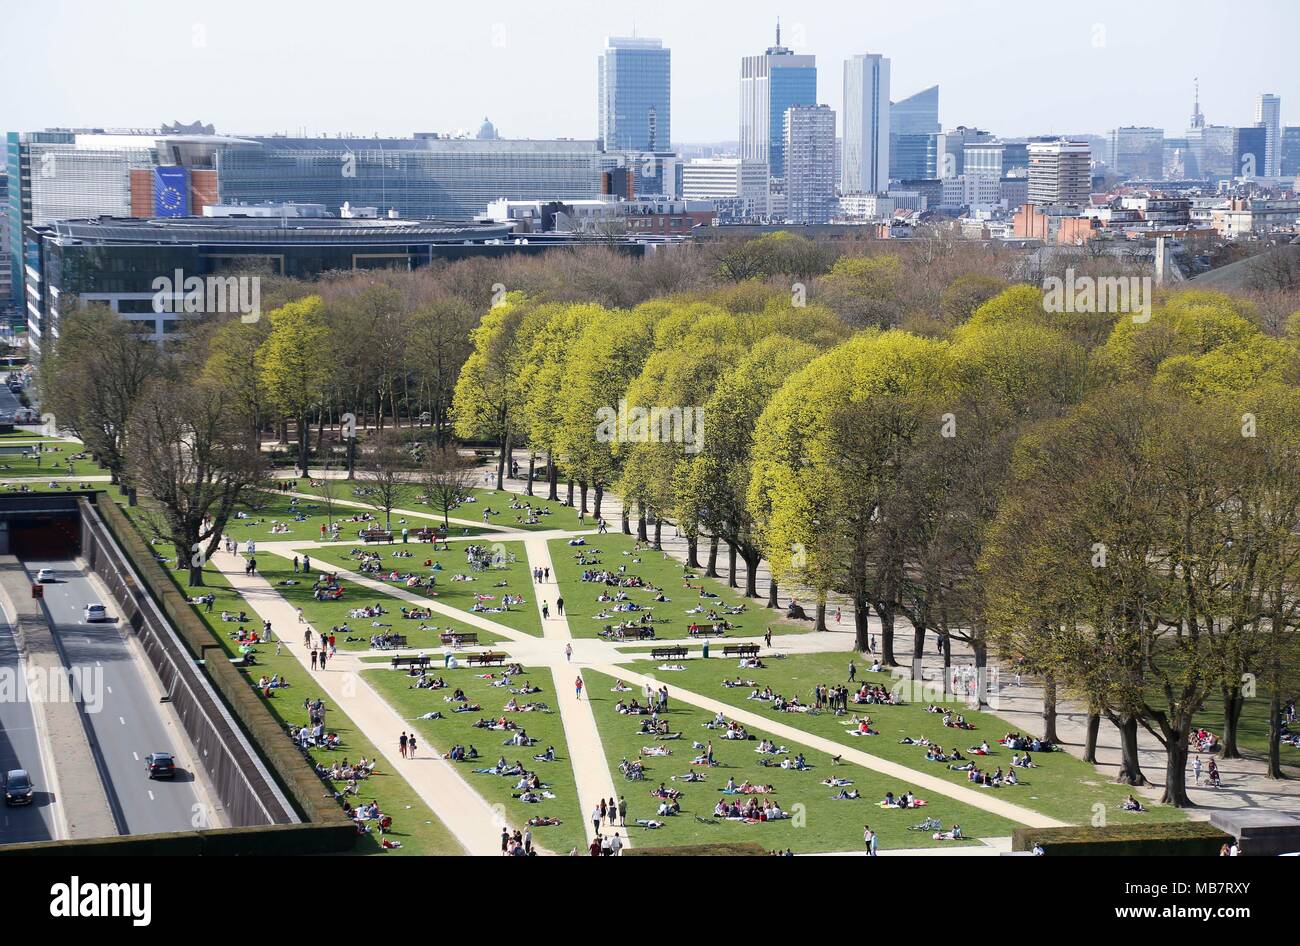 Brussels, Belgium. 8th Apr, 2018. People enjoy sunshine at Cinquantenaire park in Brussels, Belgium, April 8, 2018. As temperature here rose to around 24 degrees Celsius on Sunday, a lot of people went outdoors to enjoy sunshine after a long gloomy winter. Credit: Ye Pingfan/Xinhua/Alamy Live News Stock Photo